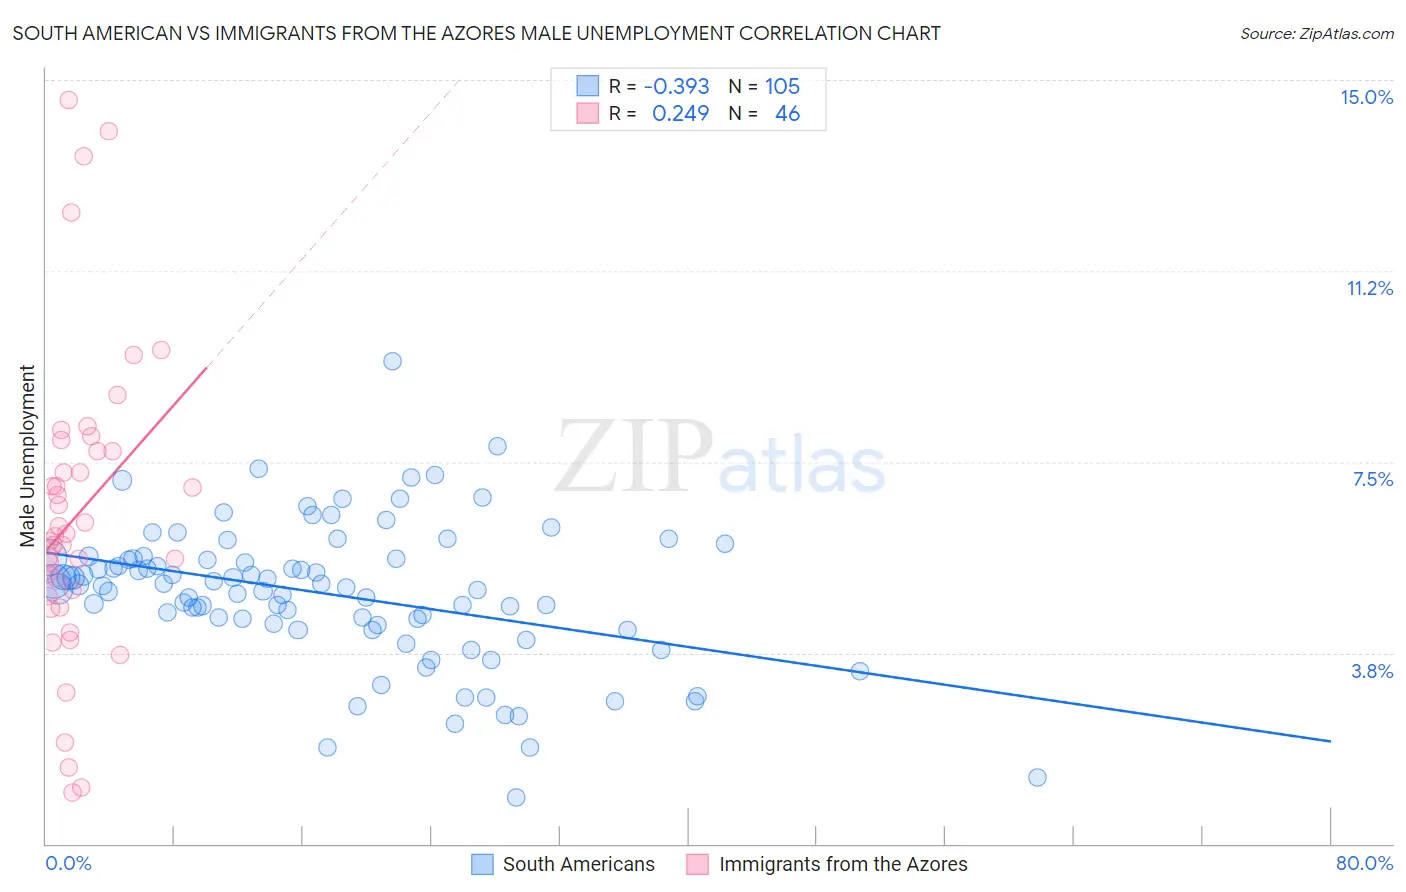 South American vs Immigrants from the Azores Male Unemployment